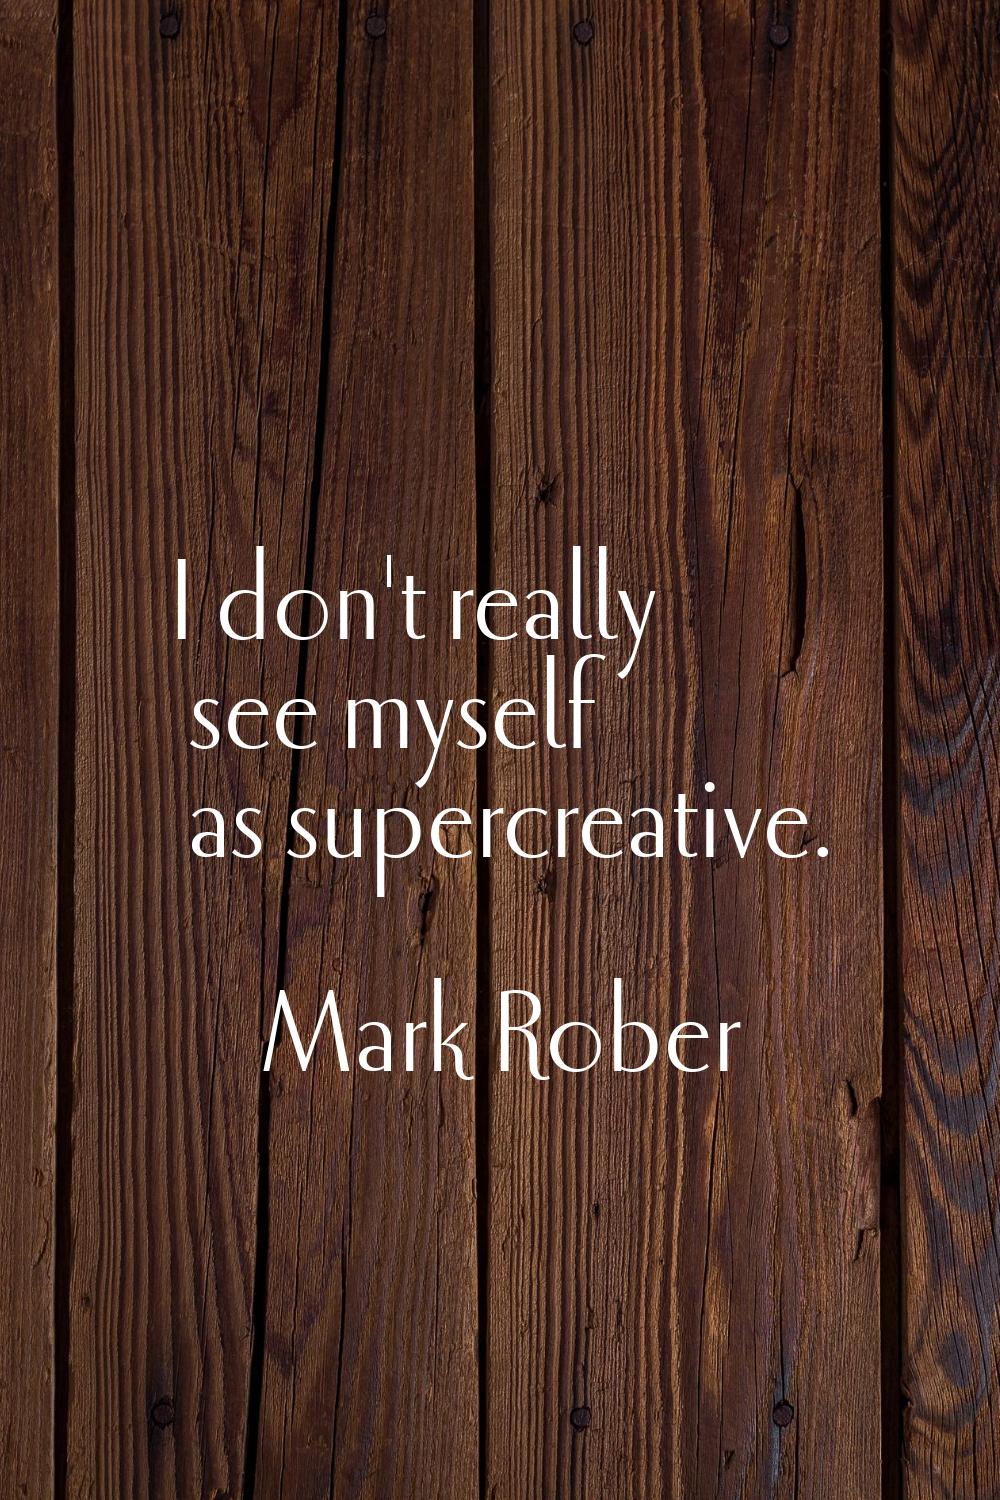 I don't really see myself as supercreative.